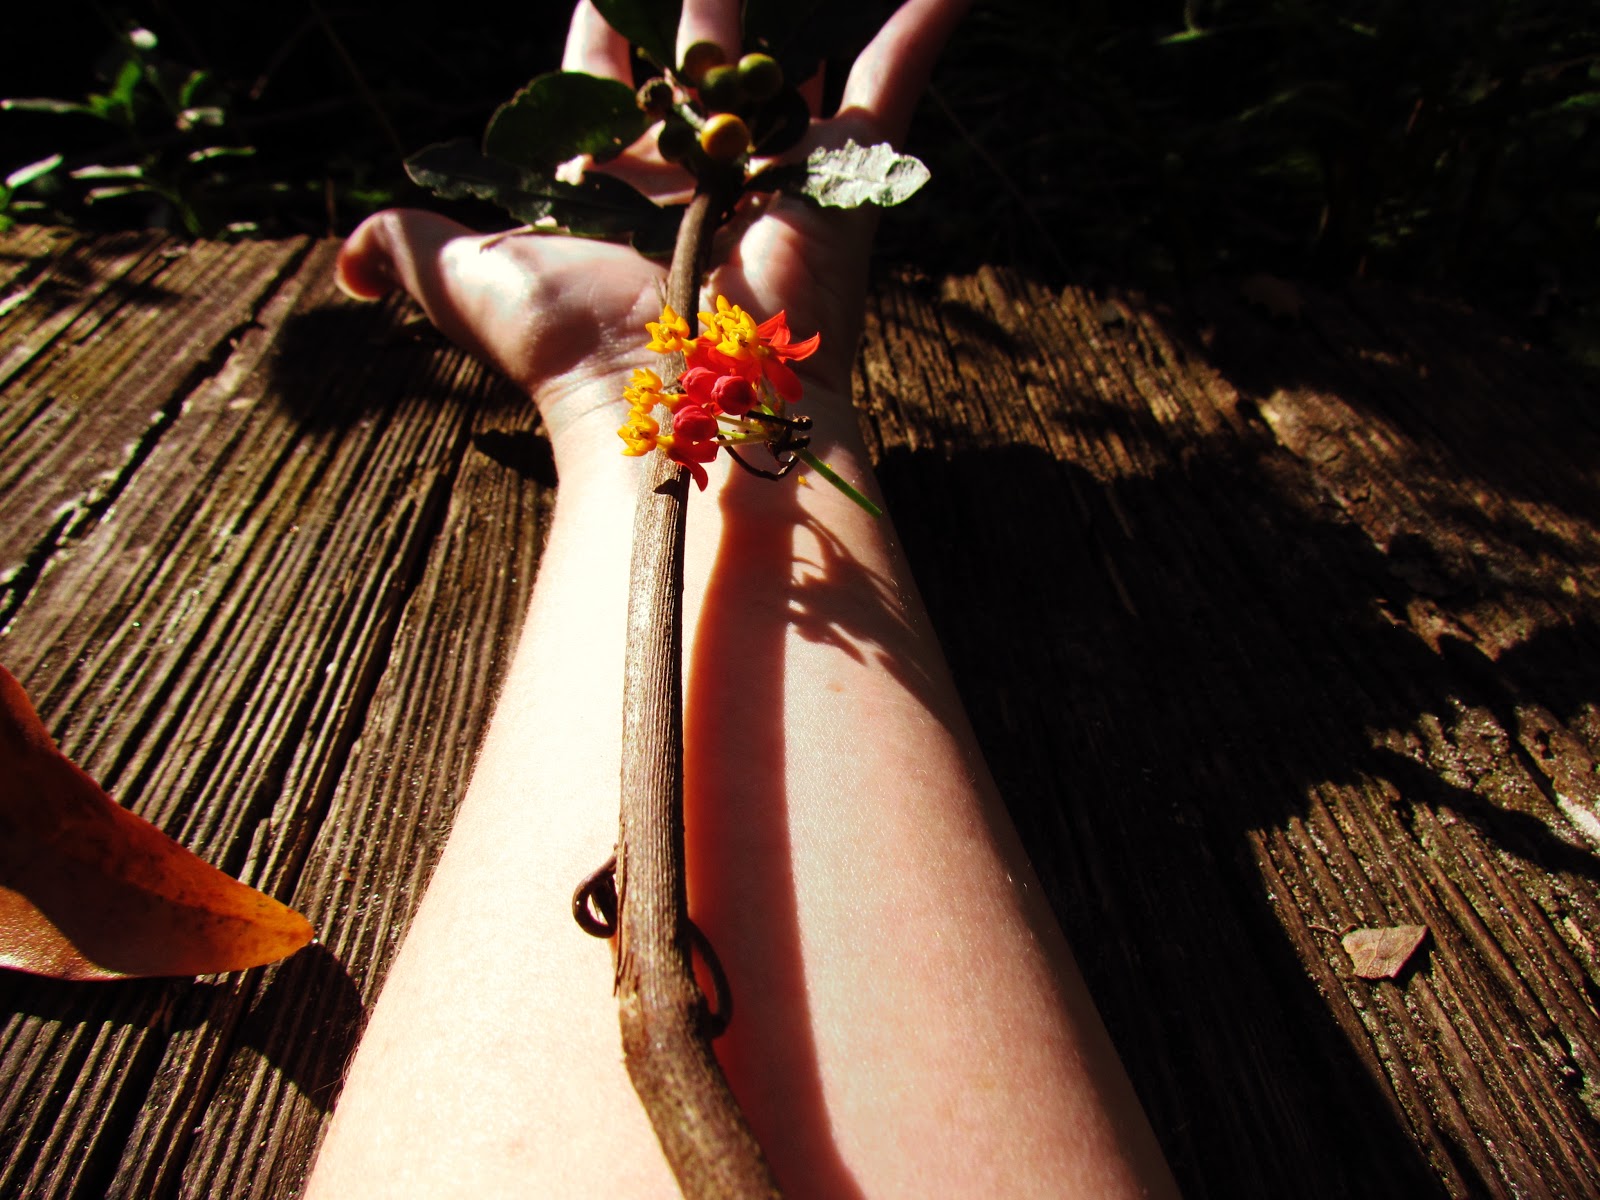 Earthing Energy + Nature Photoshoot Idea Arm Outstretched + Nature Art